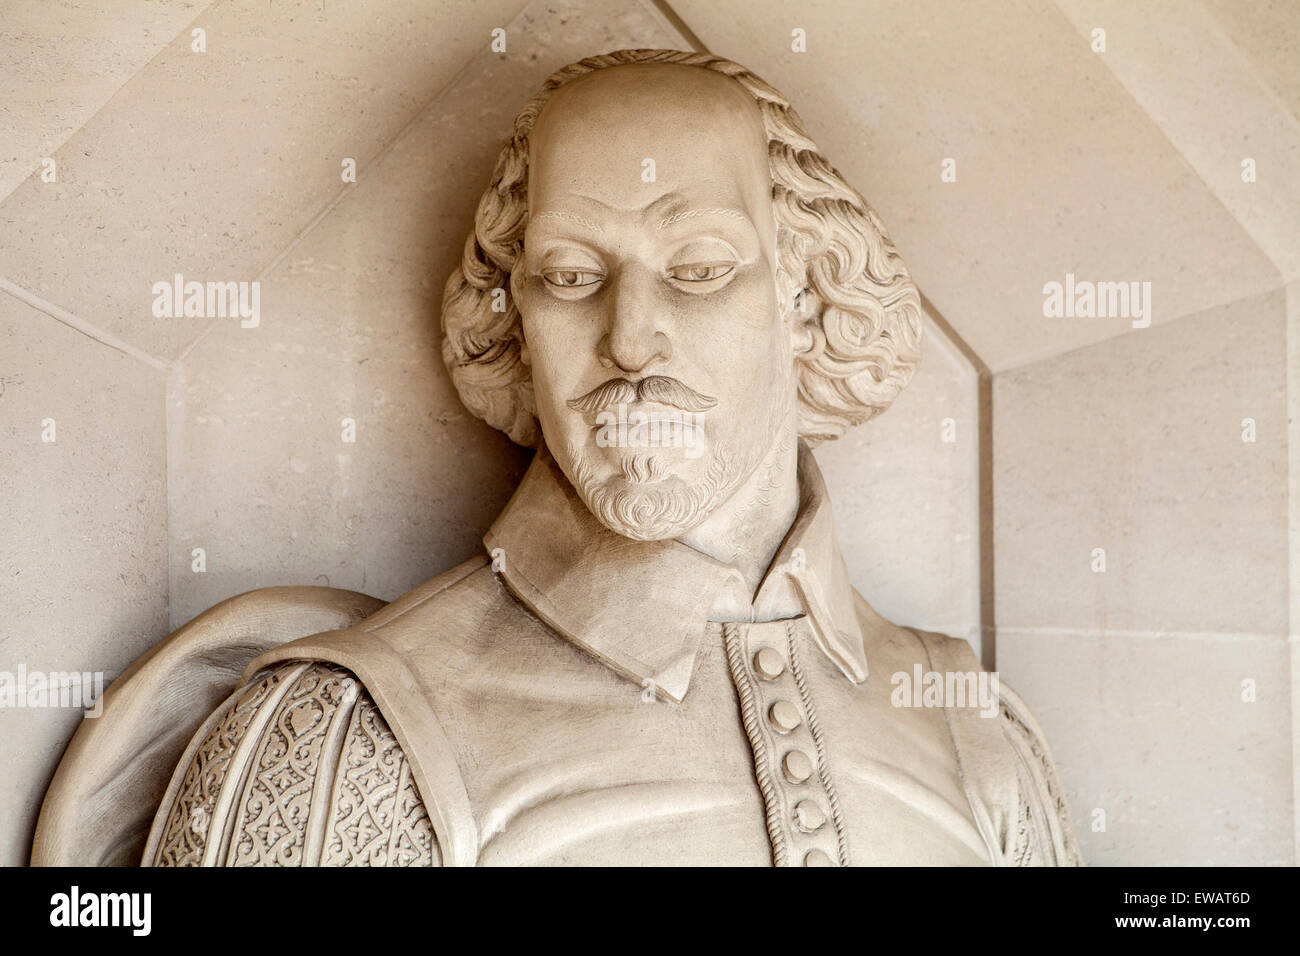 A sculpture of famous playwright William Shakespeare situated outside Guildhall Art Gallery in London. Stock Photo